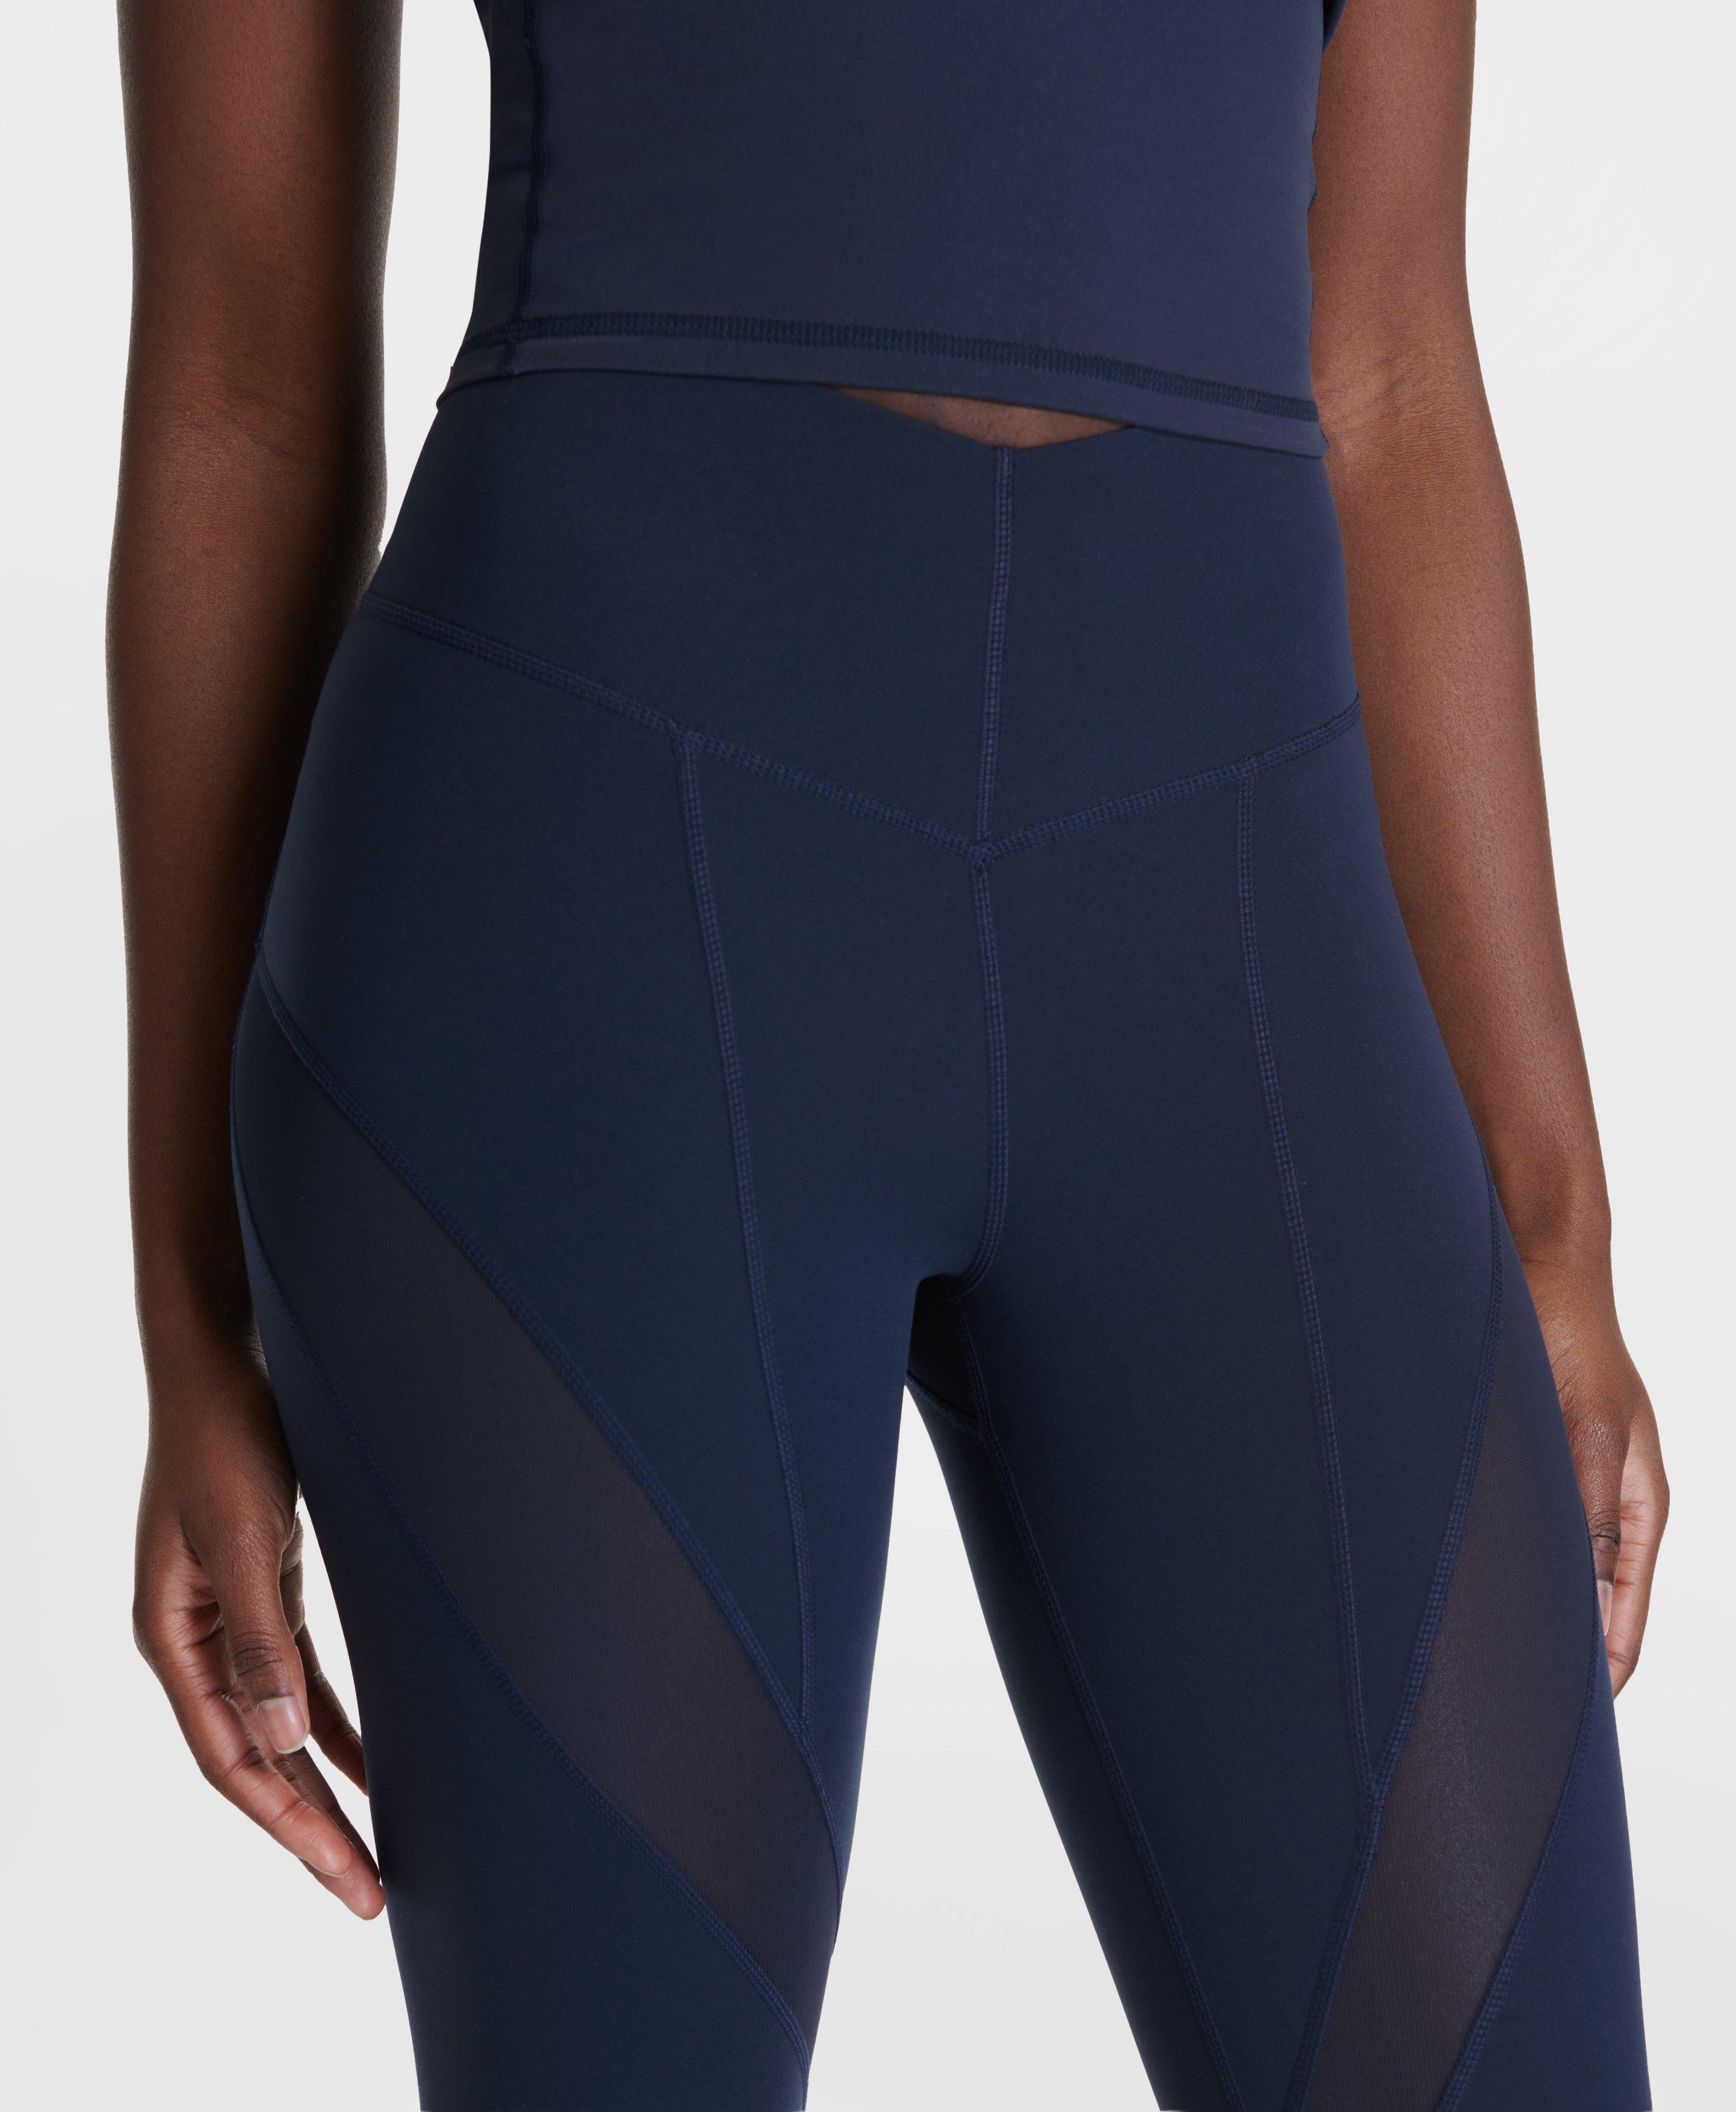 JUST-DRY Navy Blue Mesh Panel 7/8 Go Train Tights for Women